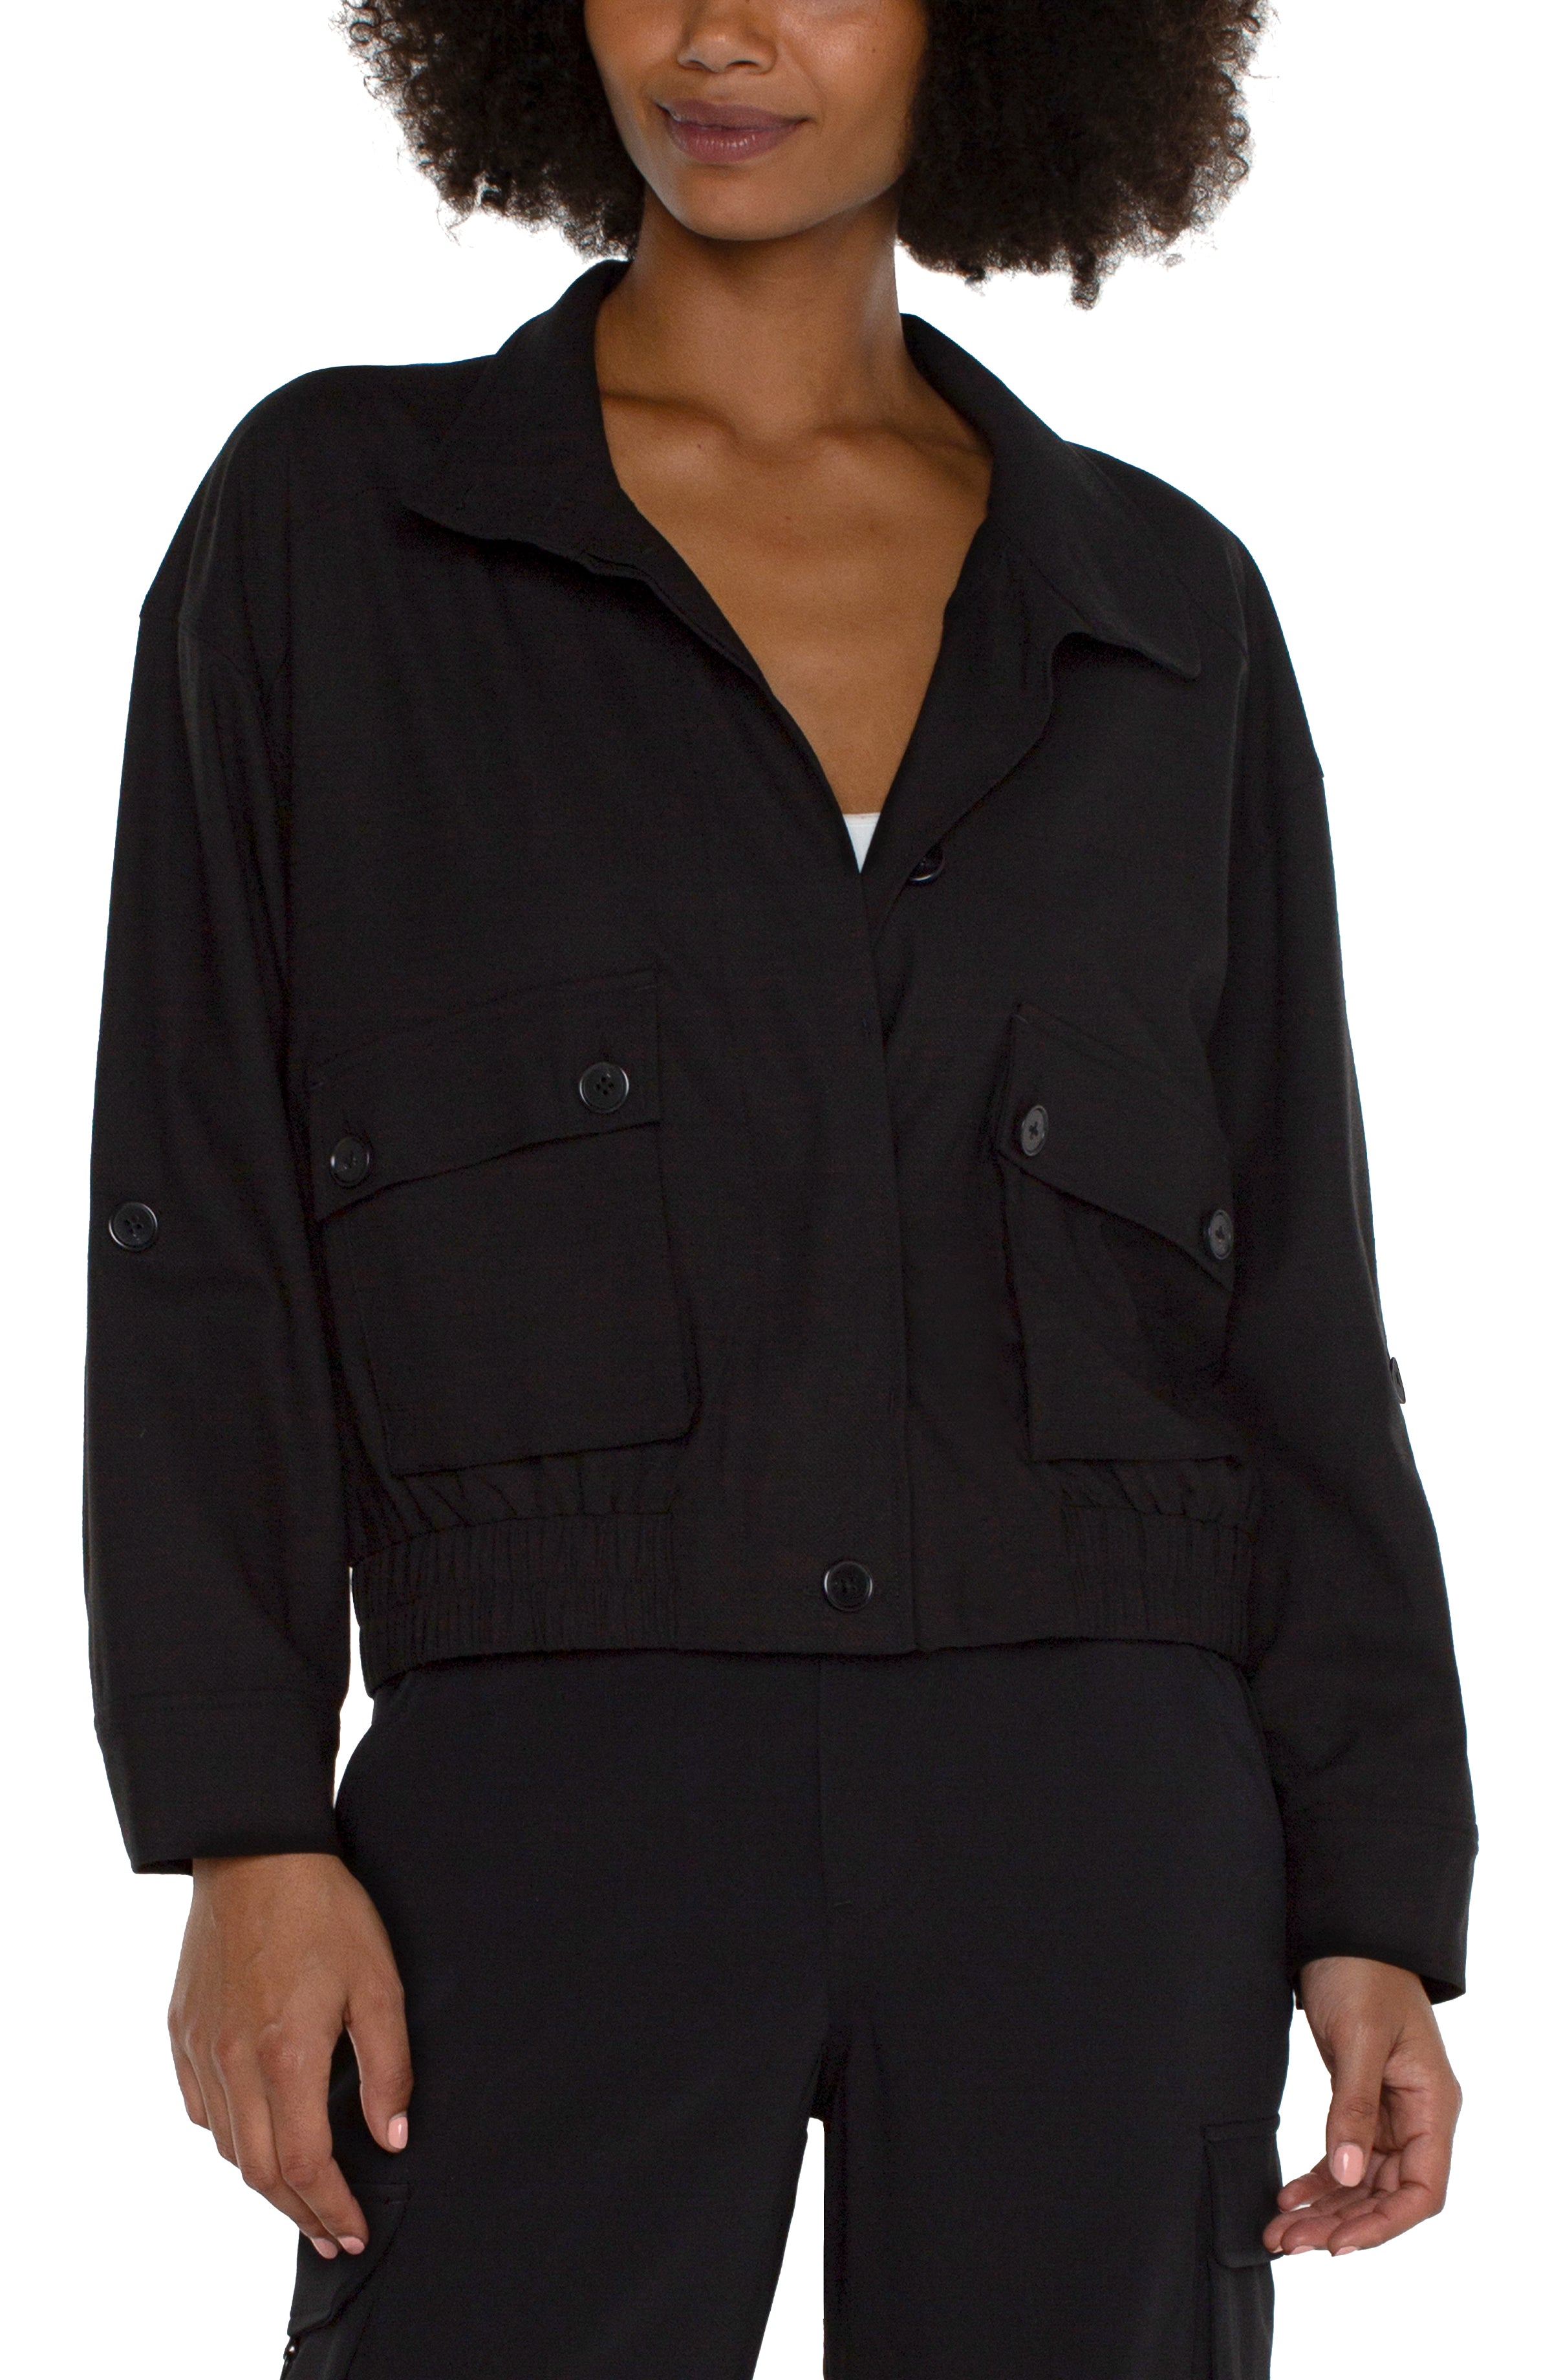 Liverpool Utility Jacket with Cinch Hem - Black Front View